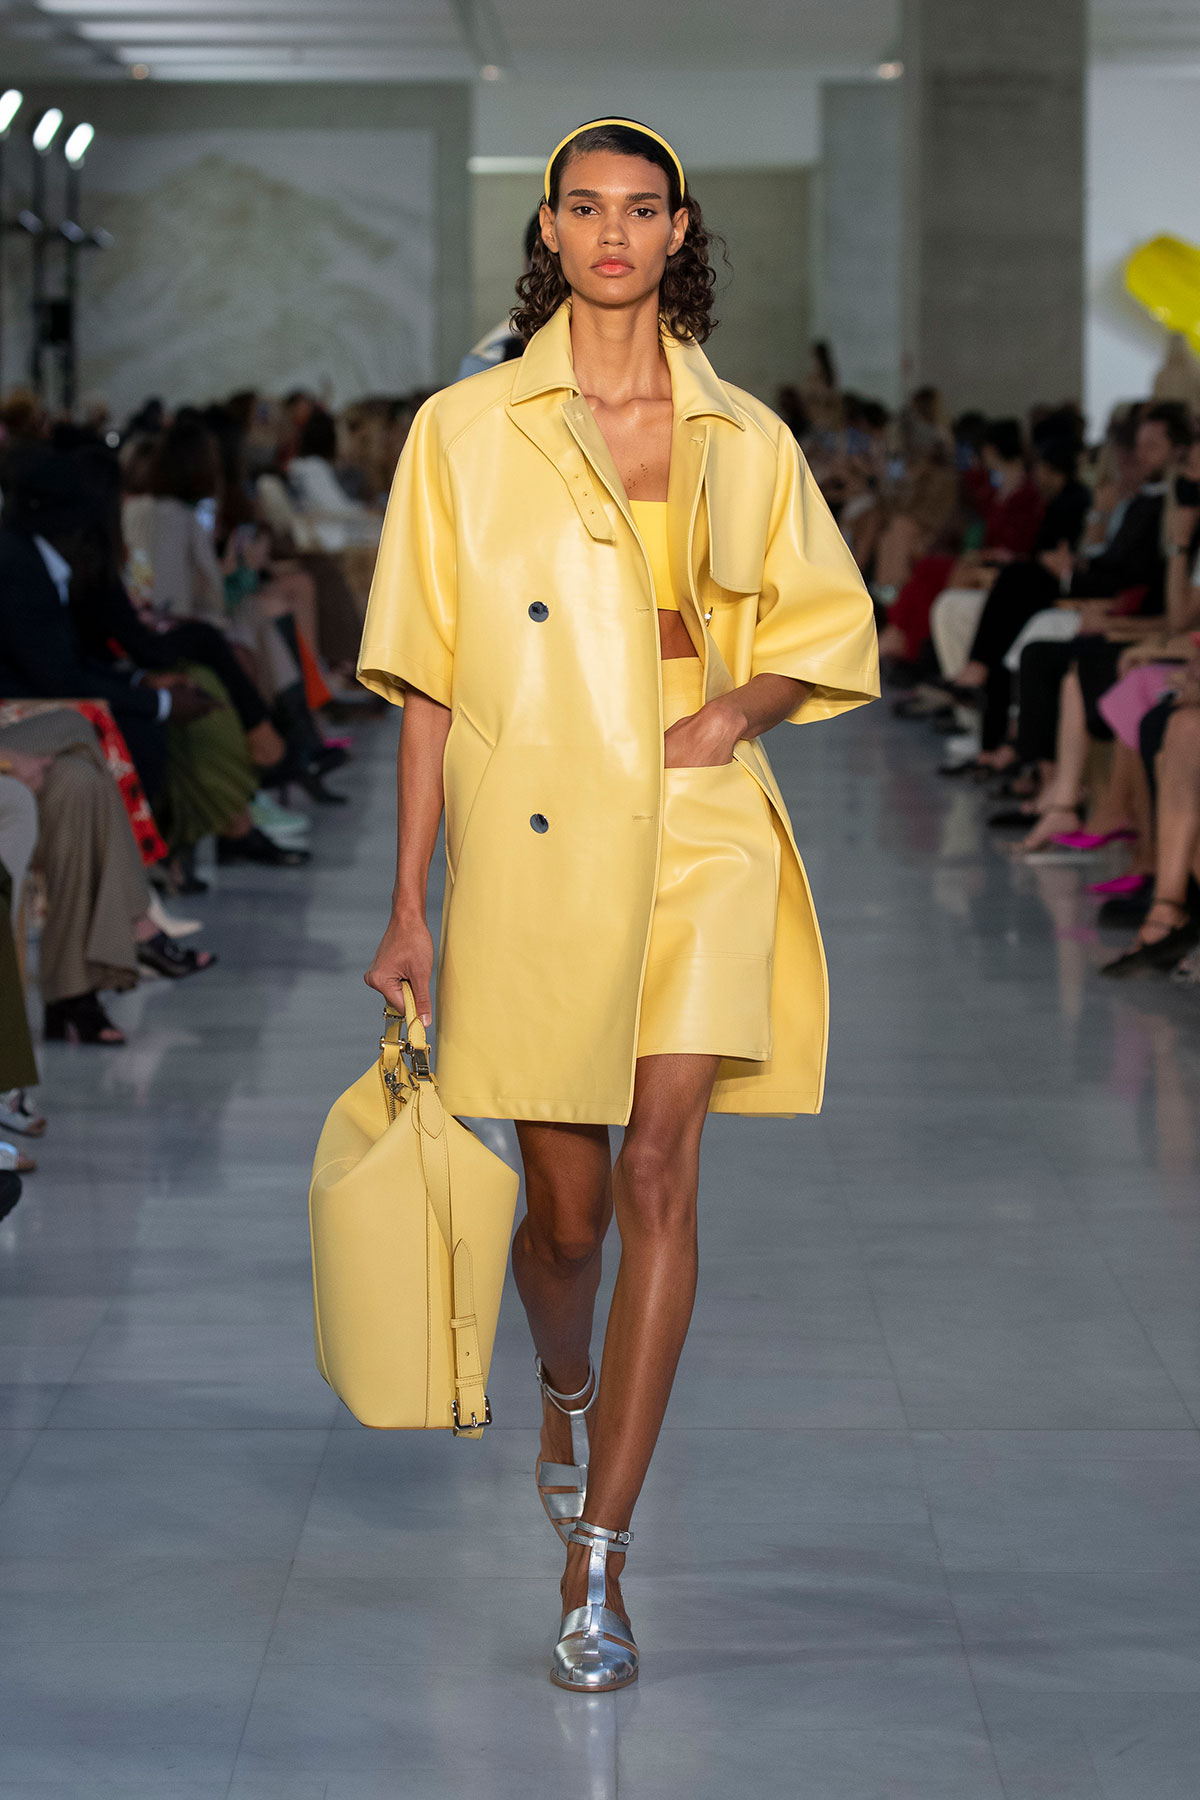 Max Mara Spring Summer 2022 Collection | The Fashionography